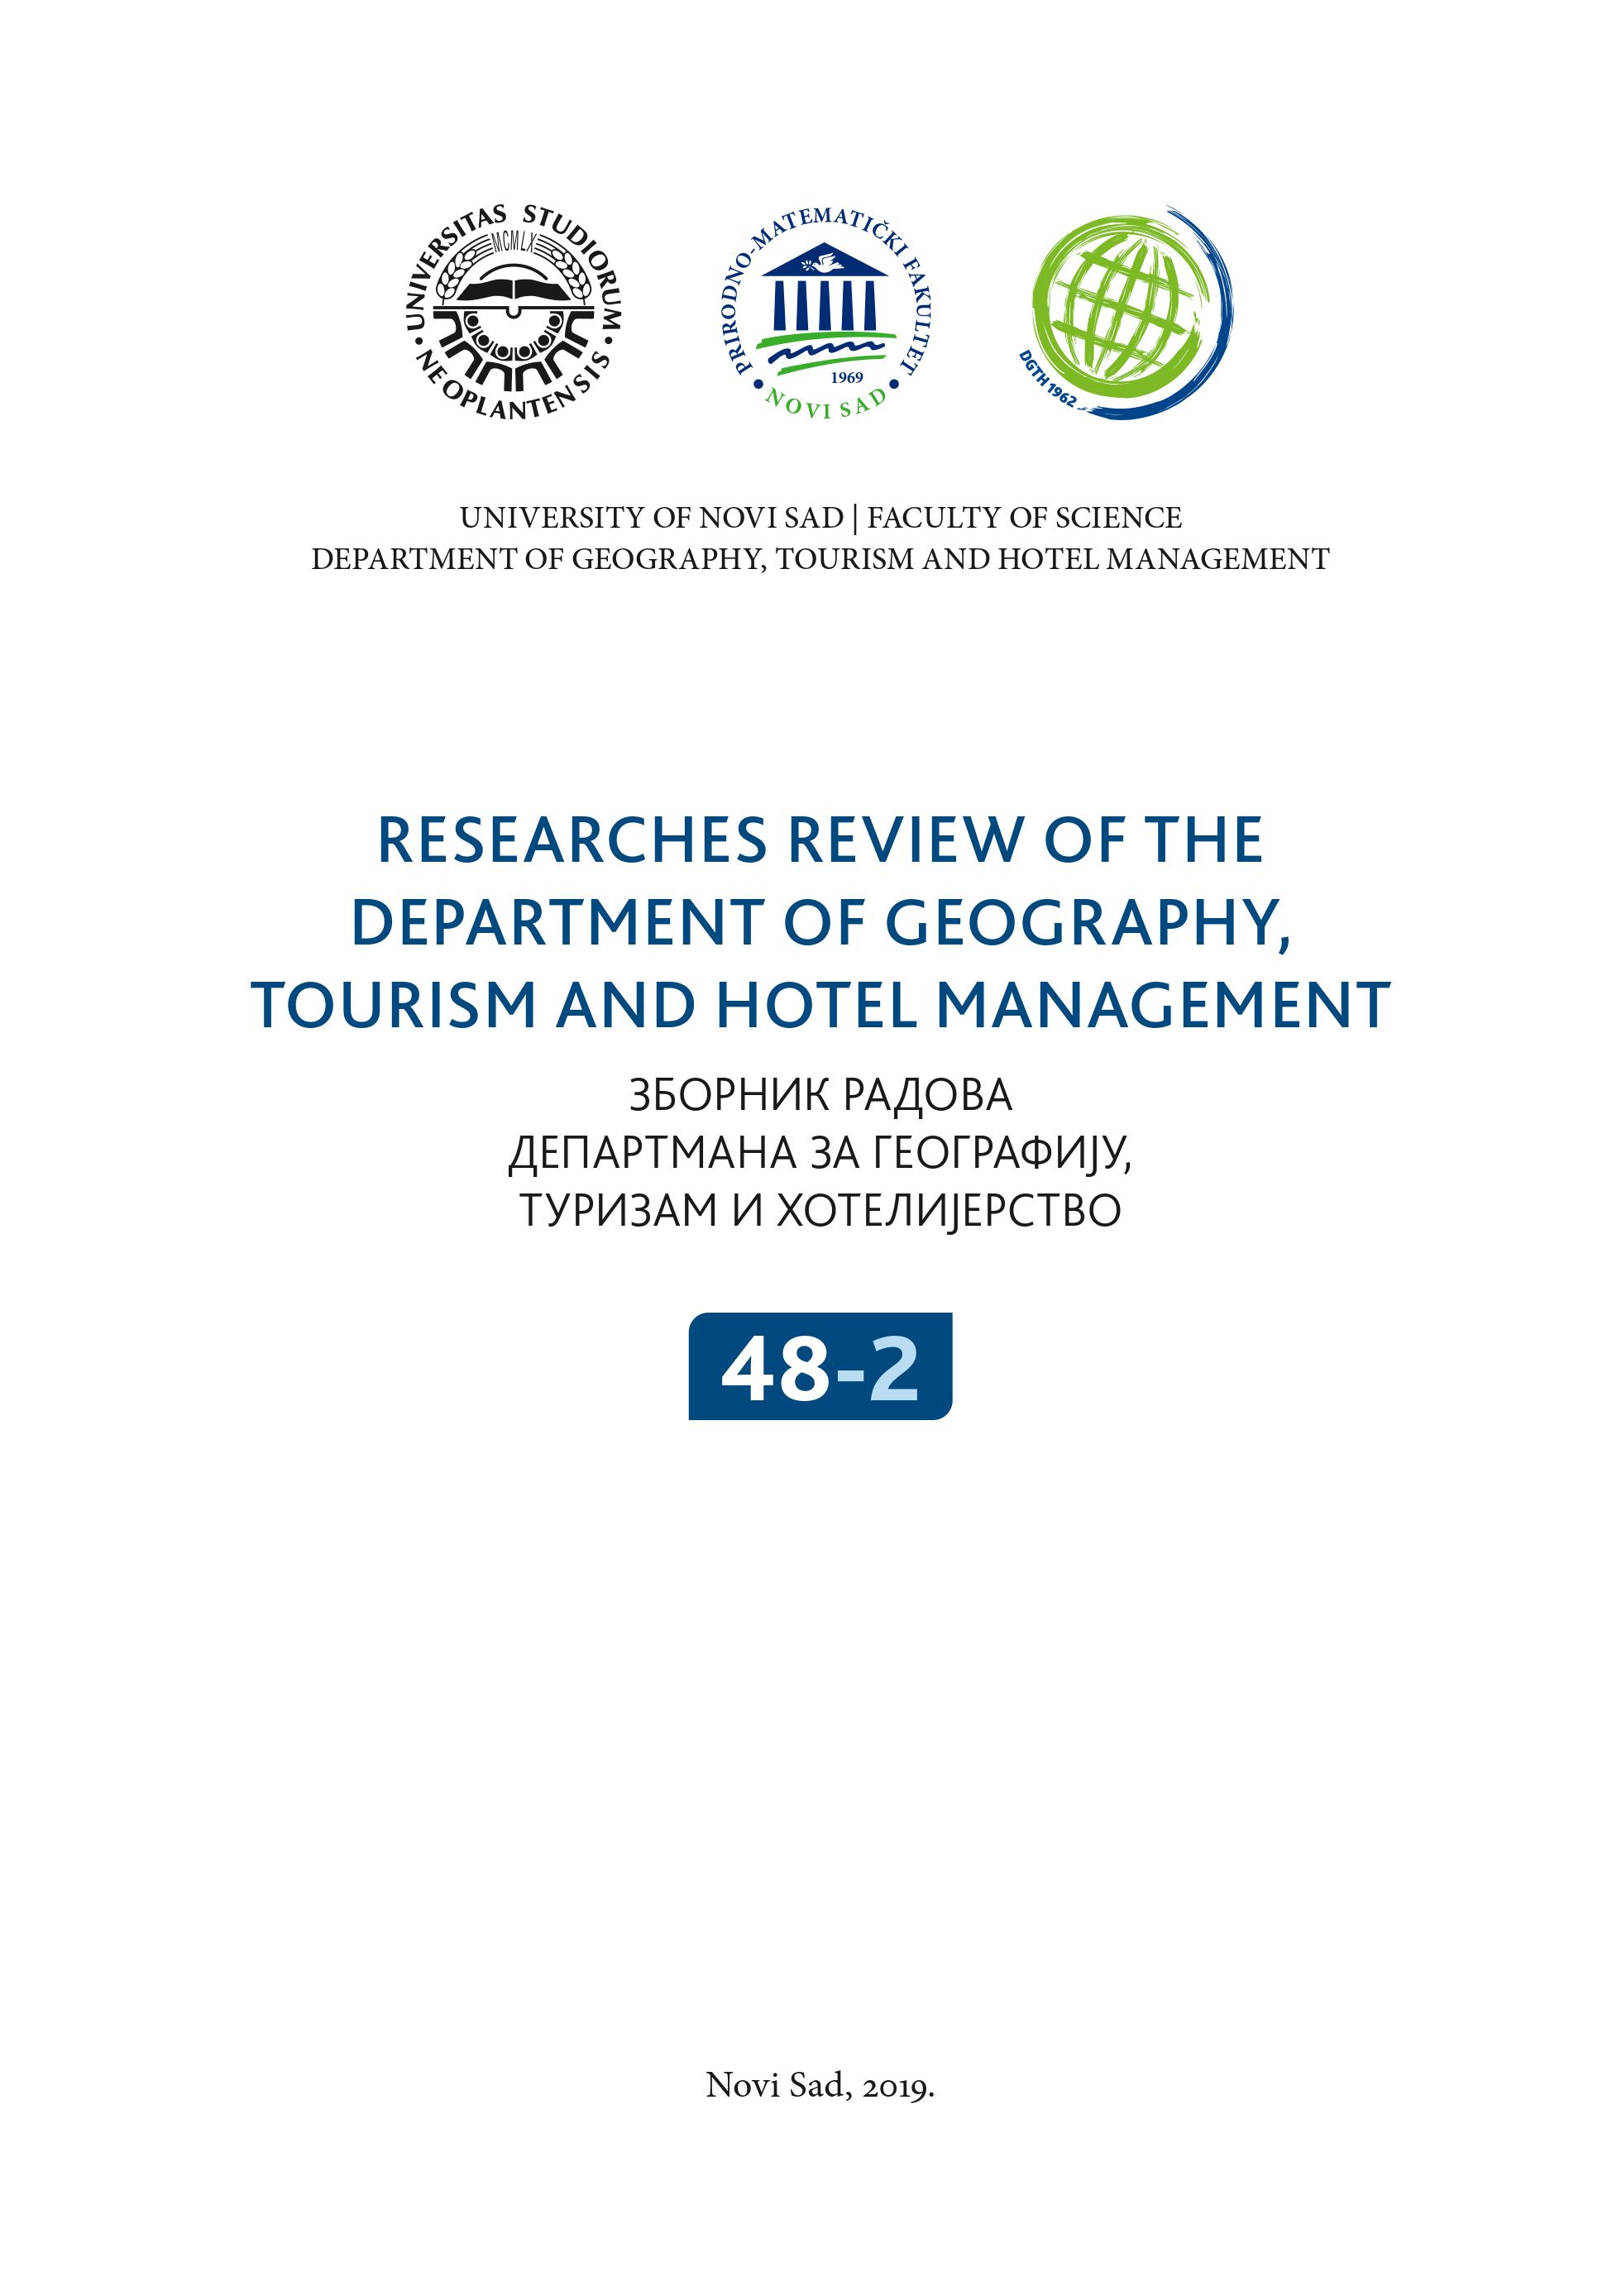 THE TISZA RIVER VALLEY TOURISM
IN REGIONAL PLANNING DOCUMENTS
OF SERBIA AND HUNGARY –
COMMON TOURISM DEVELOPMENT
ON THE EXTERNAL BORDER OF THE EU Cover Image